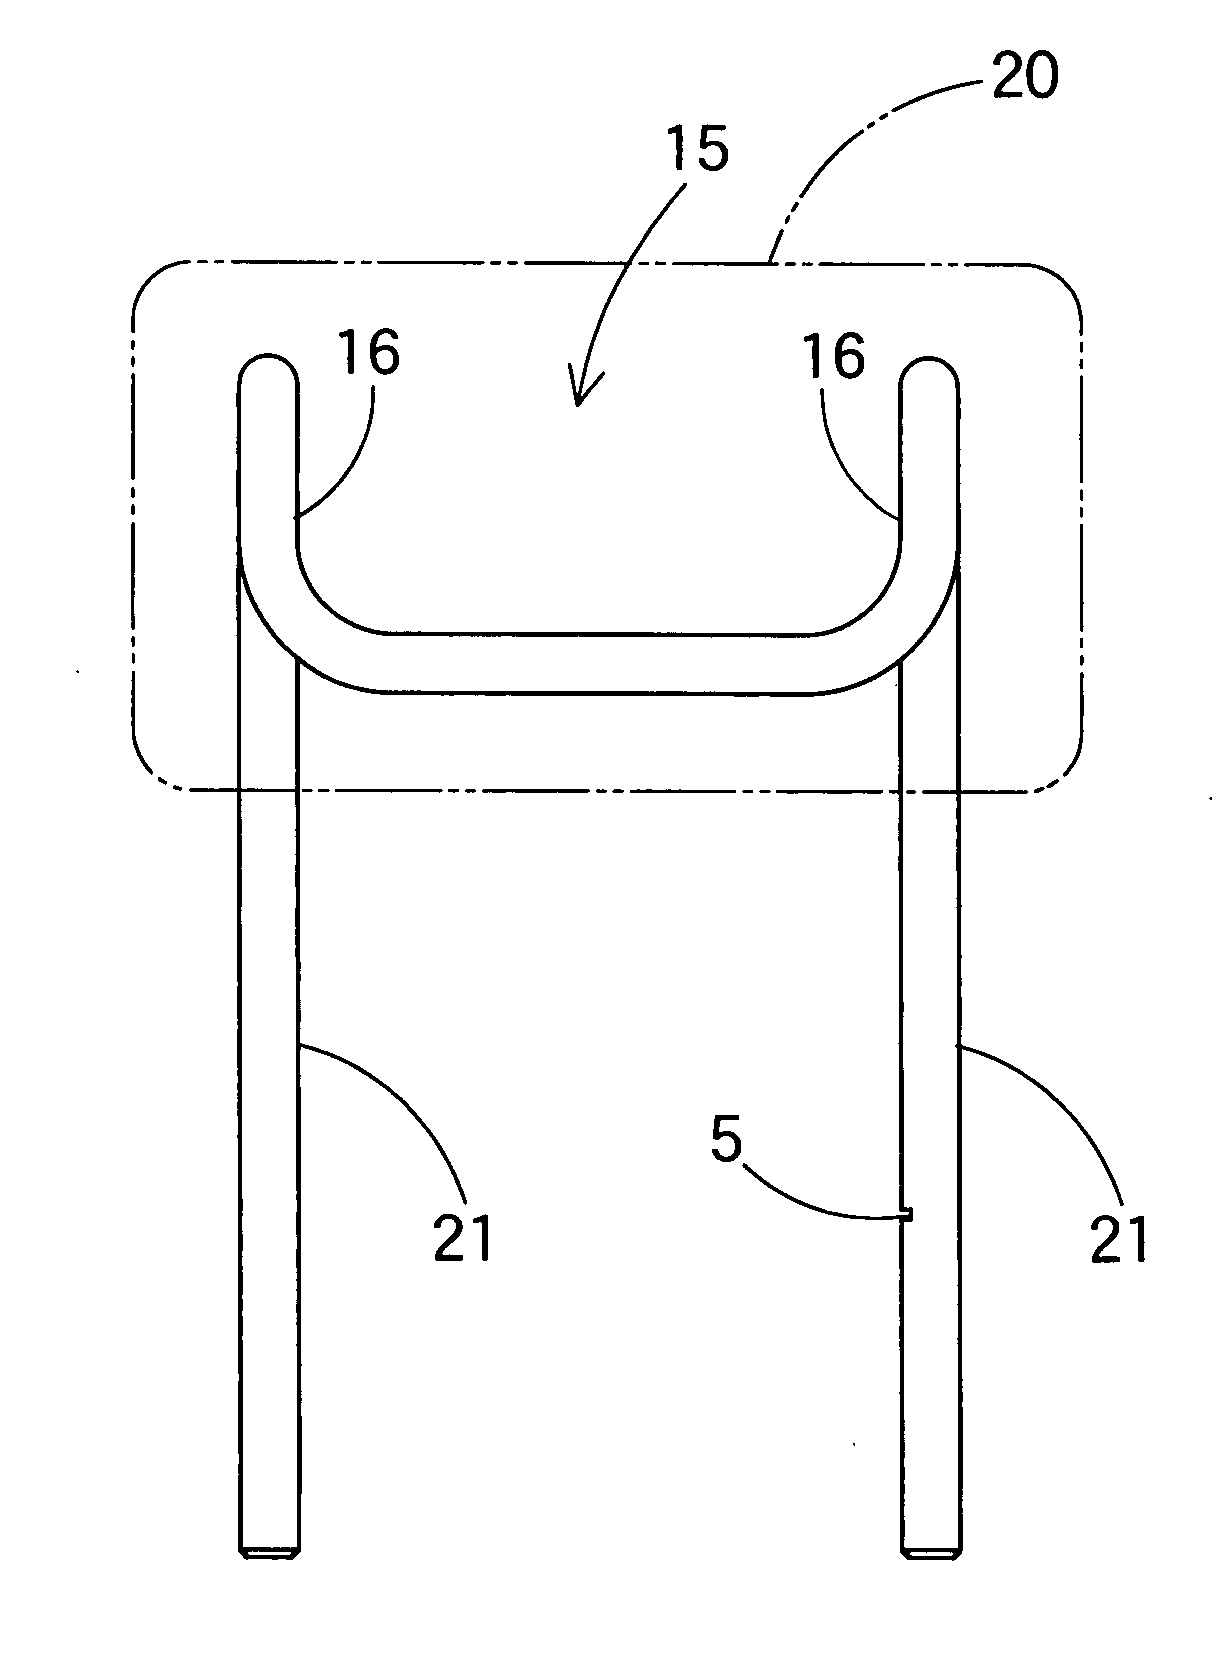 Method for manufacturing headrest stay